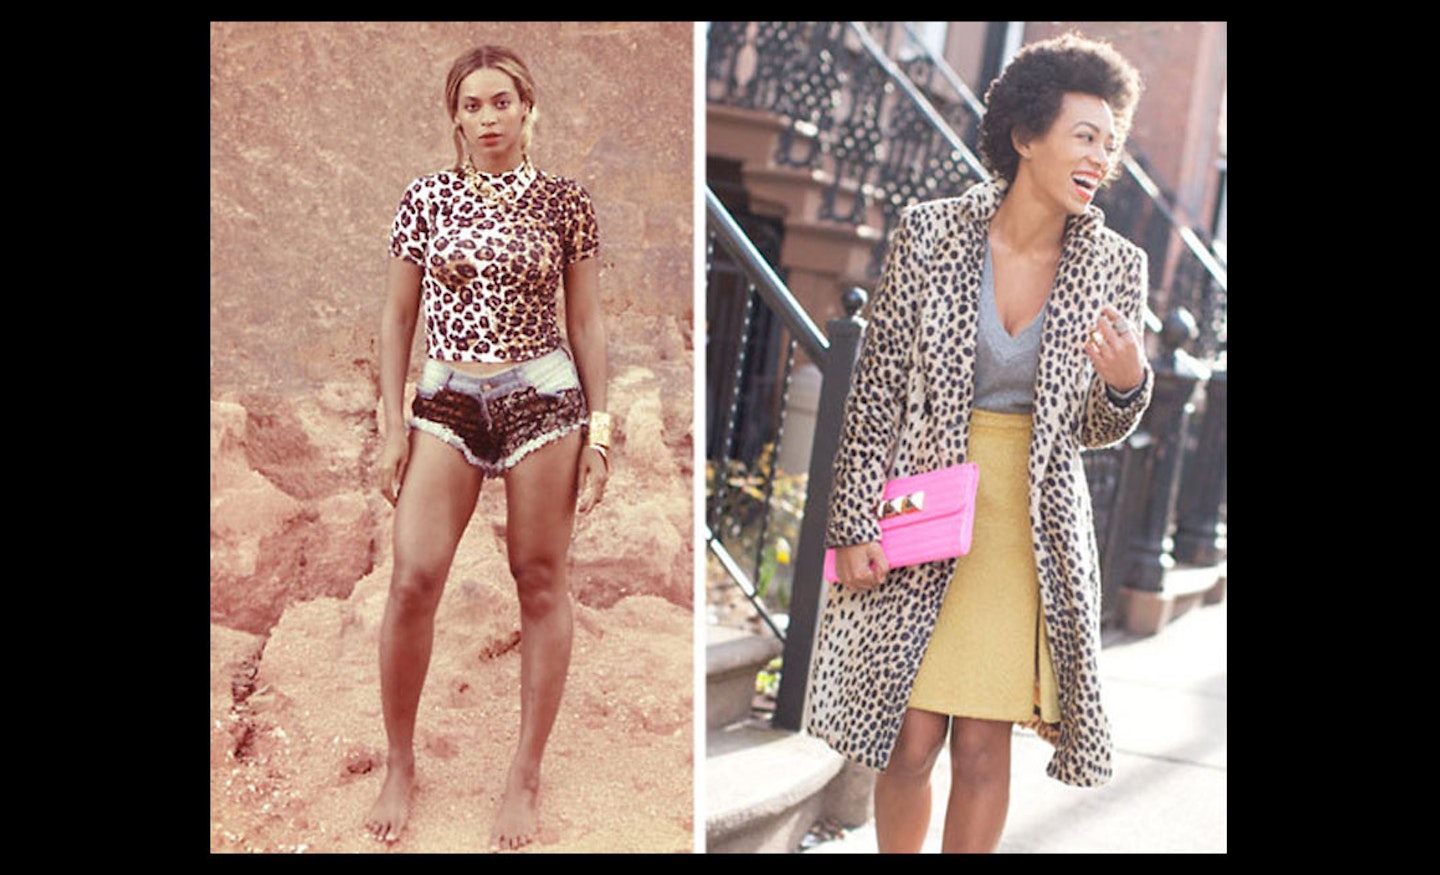 It's not just digi prints you know, Solange and B do like a bit of leopard too.